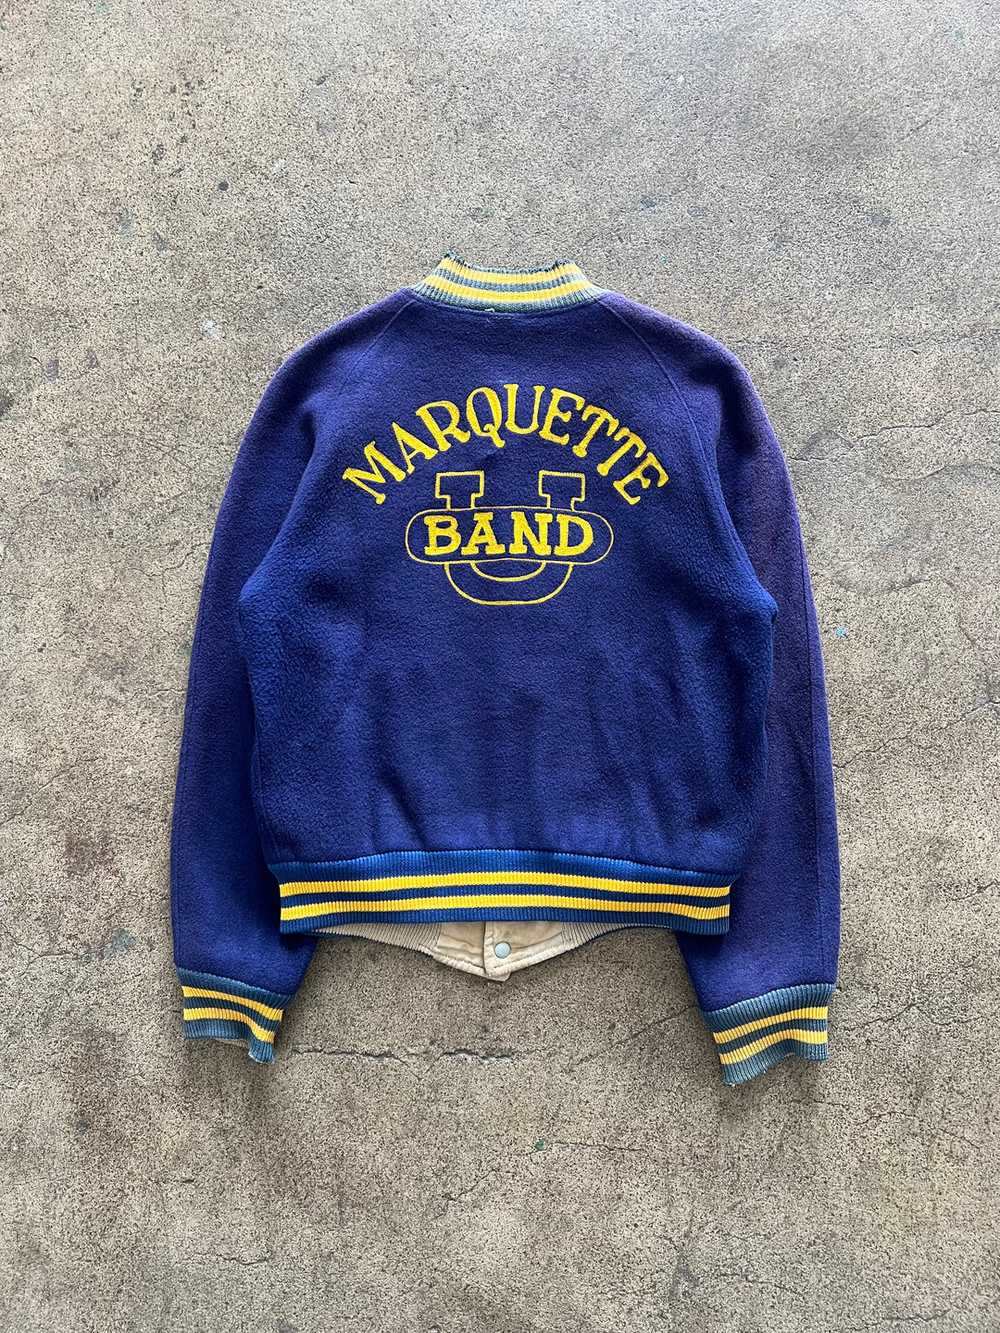 1950s Marquette Band Chain Stitch Varsity Jacket - image 3